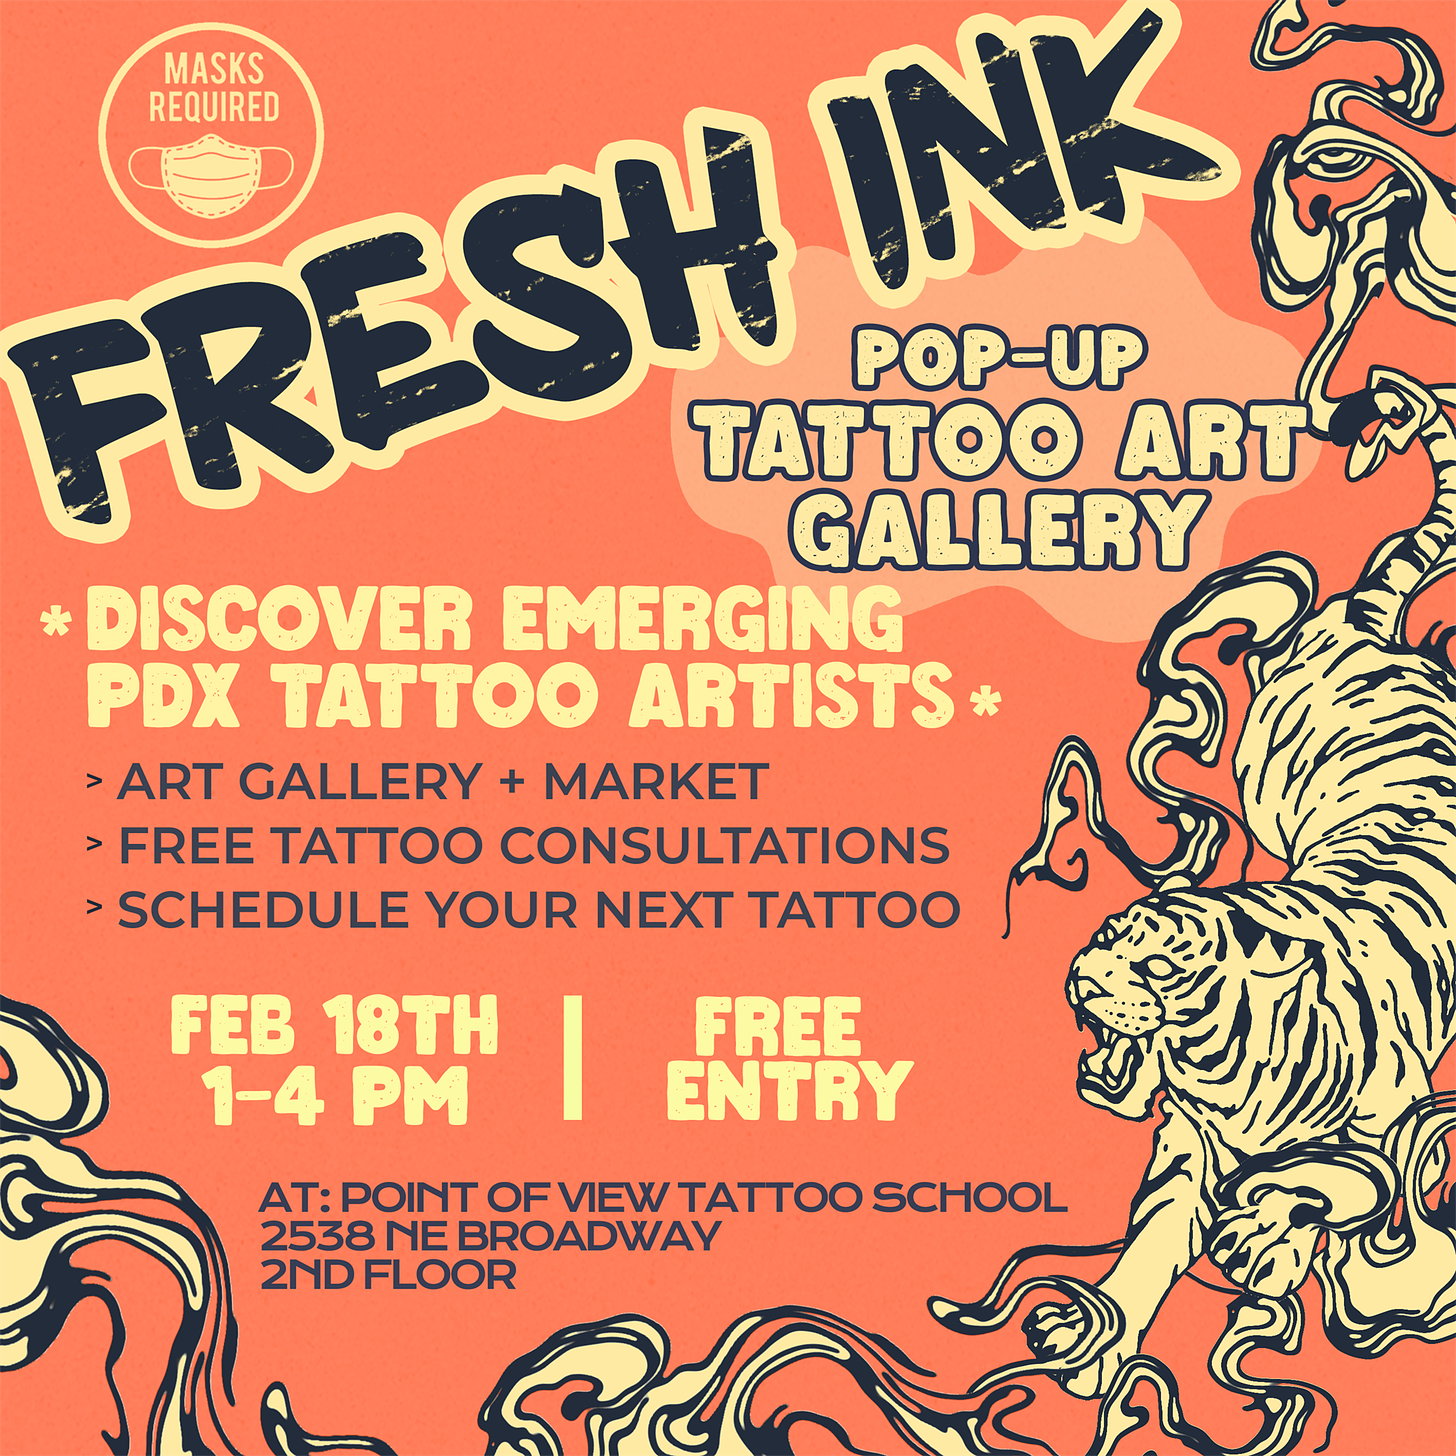 red background with tiger design in black and yellow with words that read Fresh Ink - Pop Up Tattoo Art Gallery. Discover Emerging PDX Tattoo Artists. Art Gallery + Market. Free Tattoo Consultations. Schedule Your Next Tattoo. Feb 18th 1-4pm Free Entry. At Point of View Tattoo School 2538 NE Broadway 2nd Floor. Masks Required